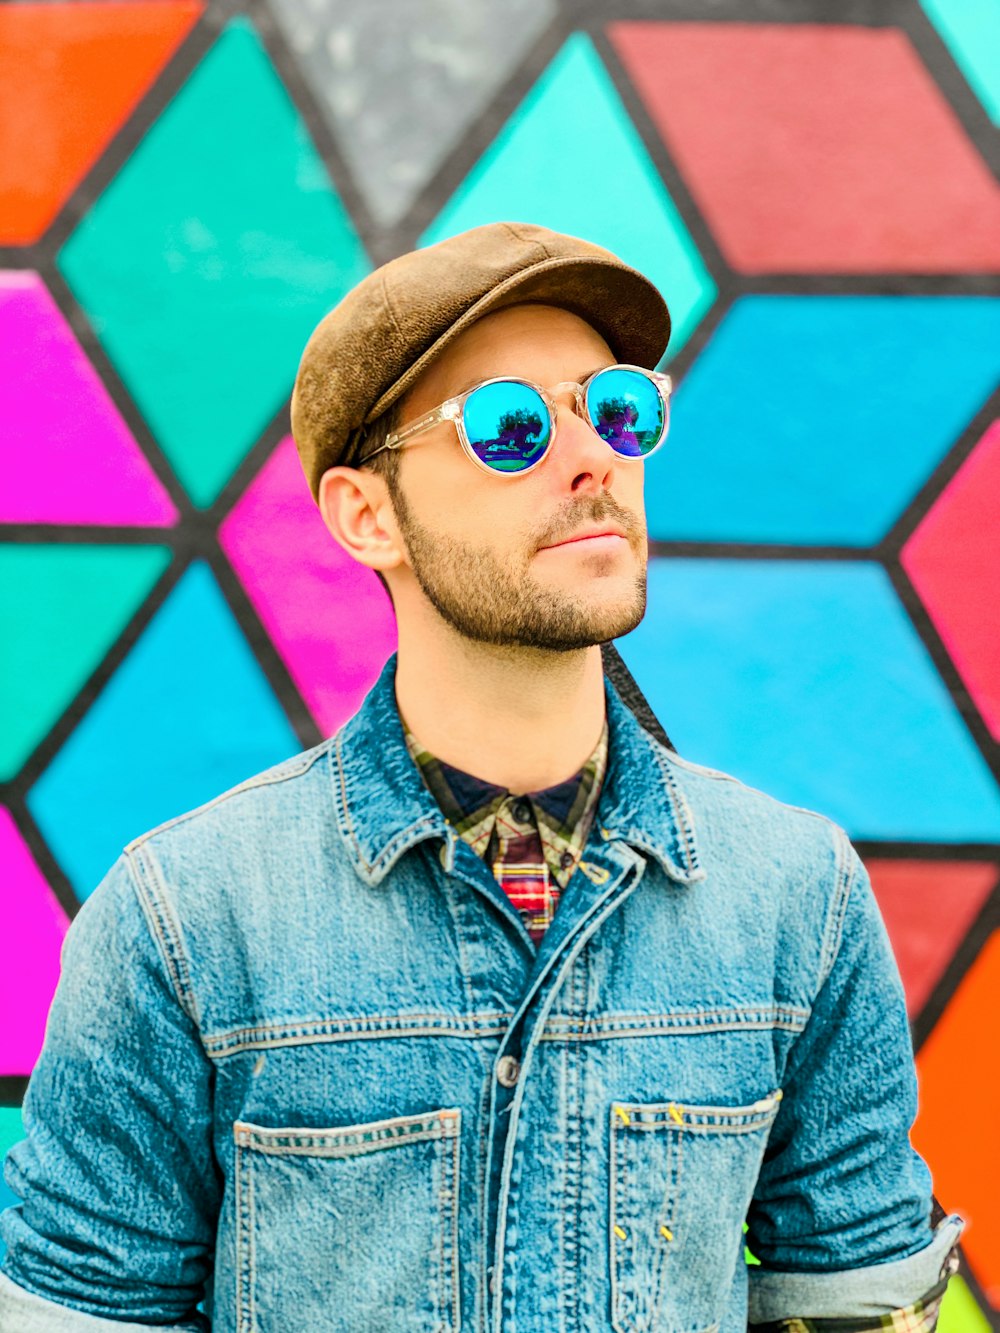 a man wearing a hat and sunglasses standing in front of a colorful wall